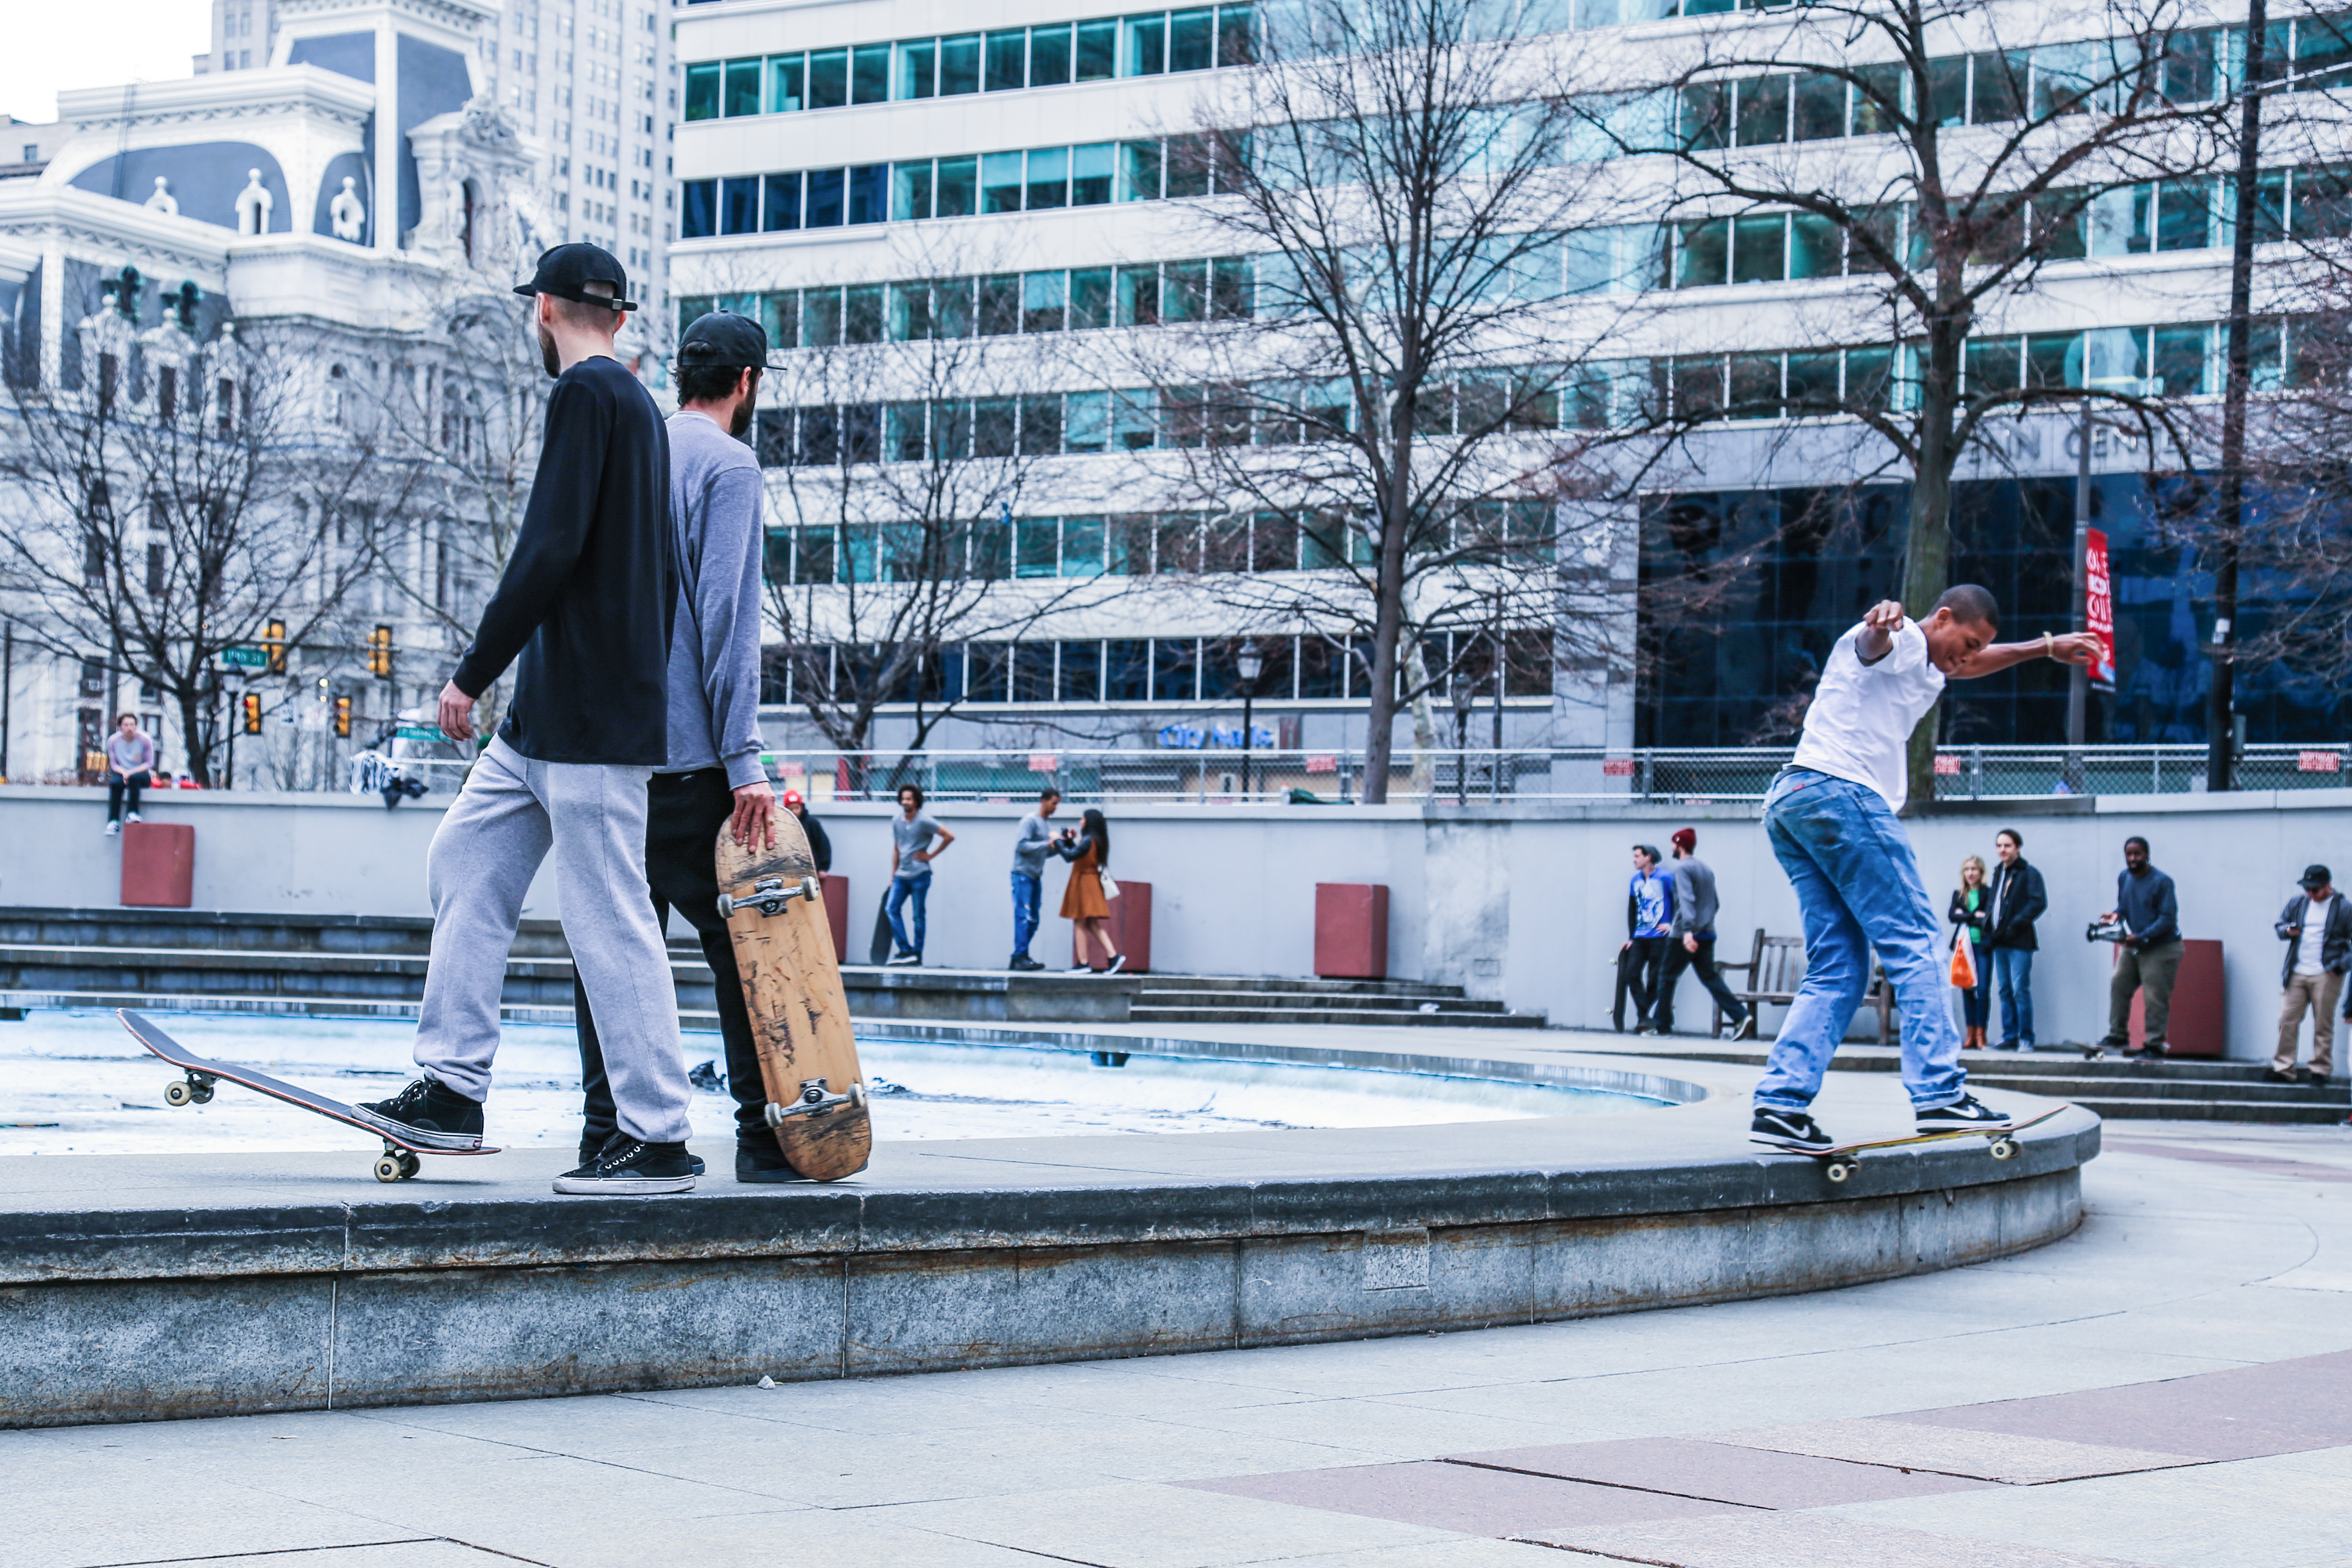 The old LOVE Park reached icon status in the 1990s and 2000s with the skateboarding community. Credit: Streets Dept/Conrad Benner